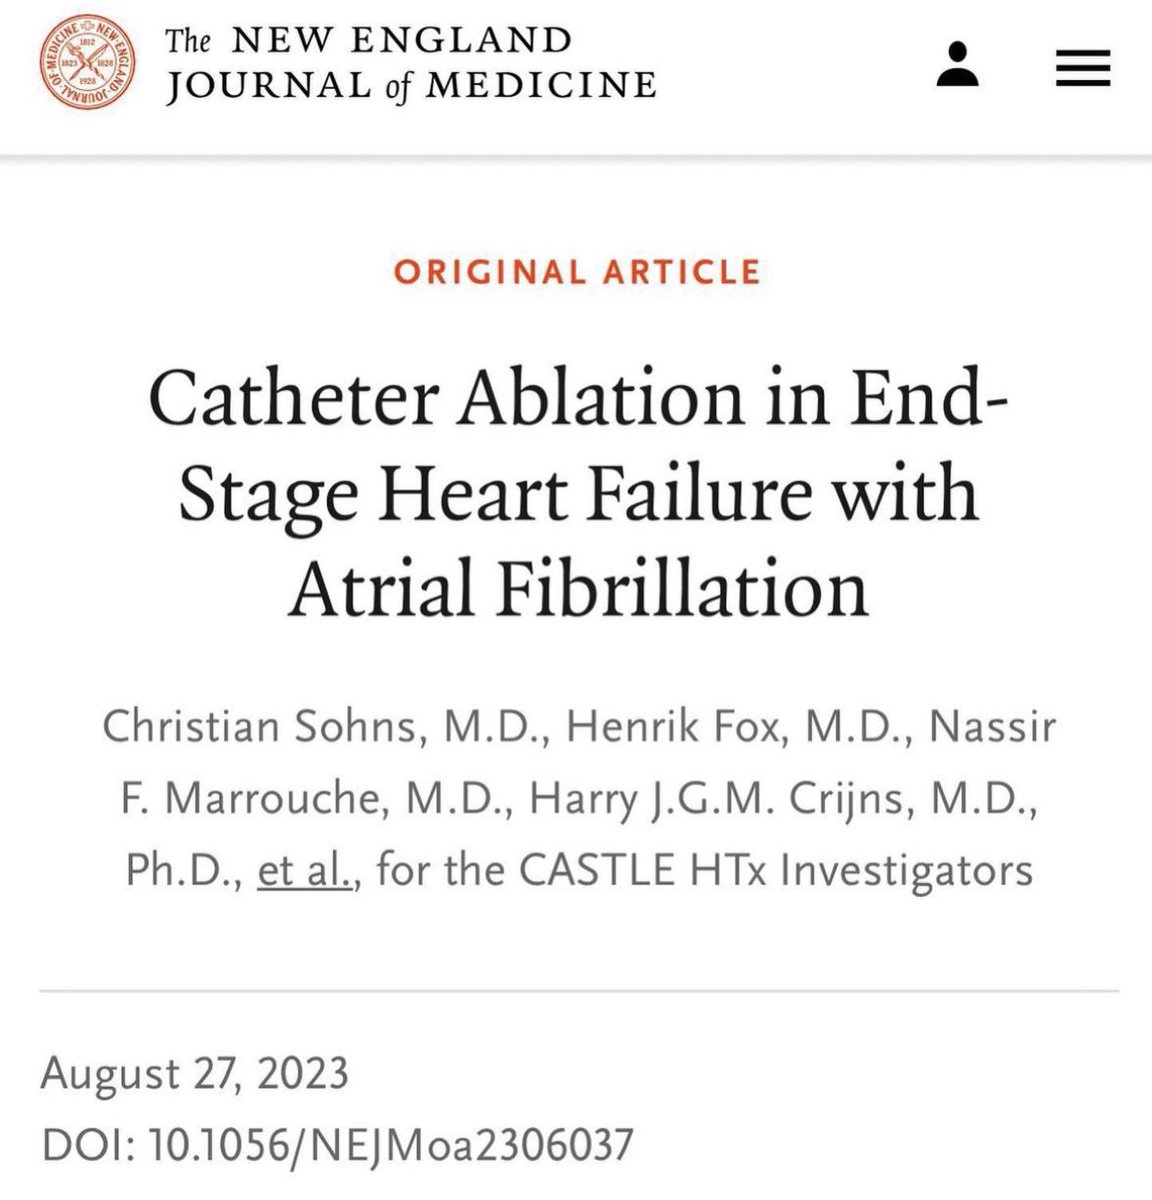 Catheter ablation in end-stage heart failure? A population not previously studied in this context, having been excluded from prior large trials. This trial showed the importance of sinus rhythm maintenance in this vulnerable population. CASTLE HTx Trial, NEJM 2023 ♥️